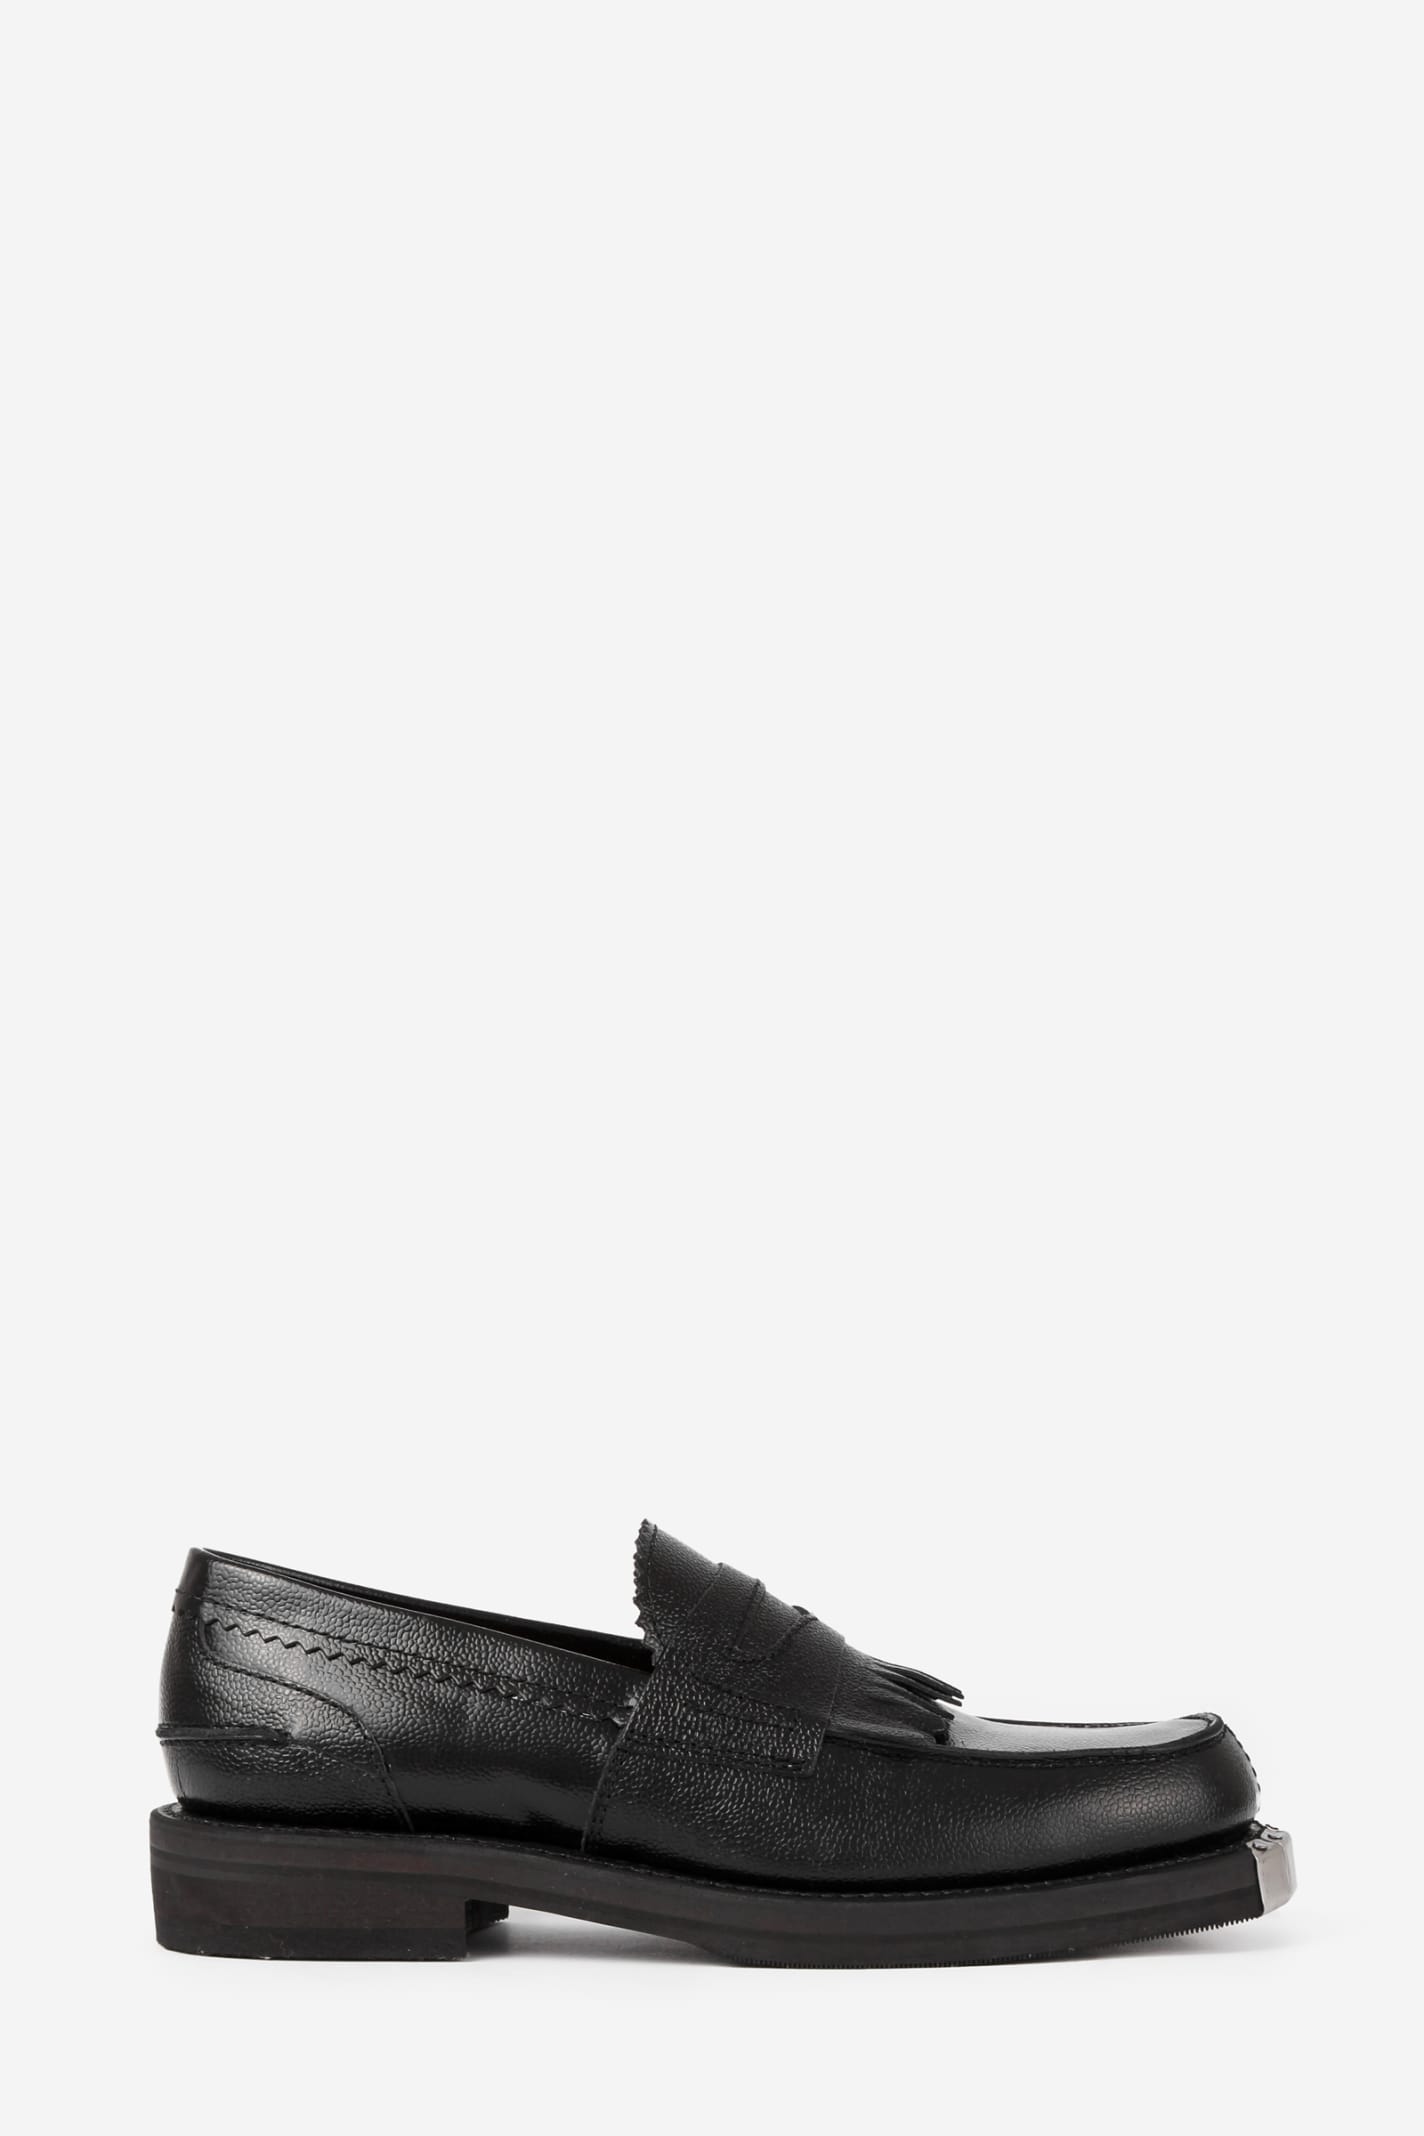 Our Legacy Loafers